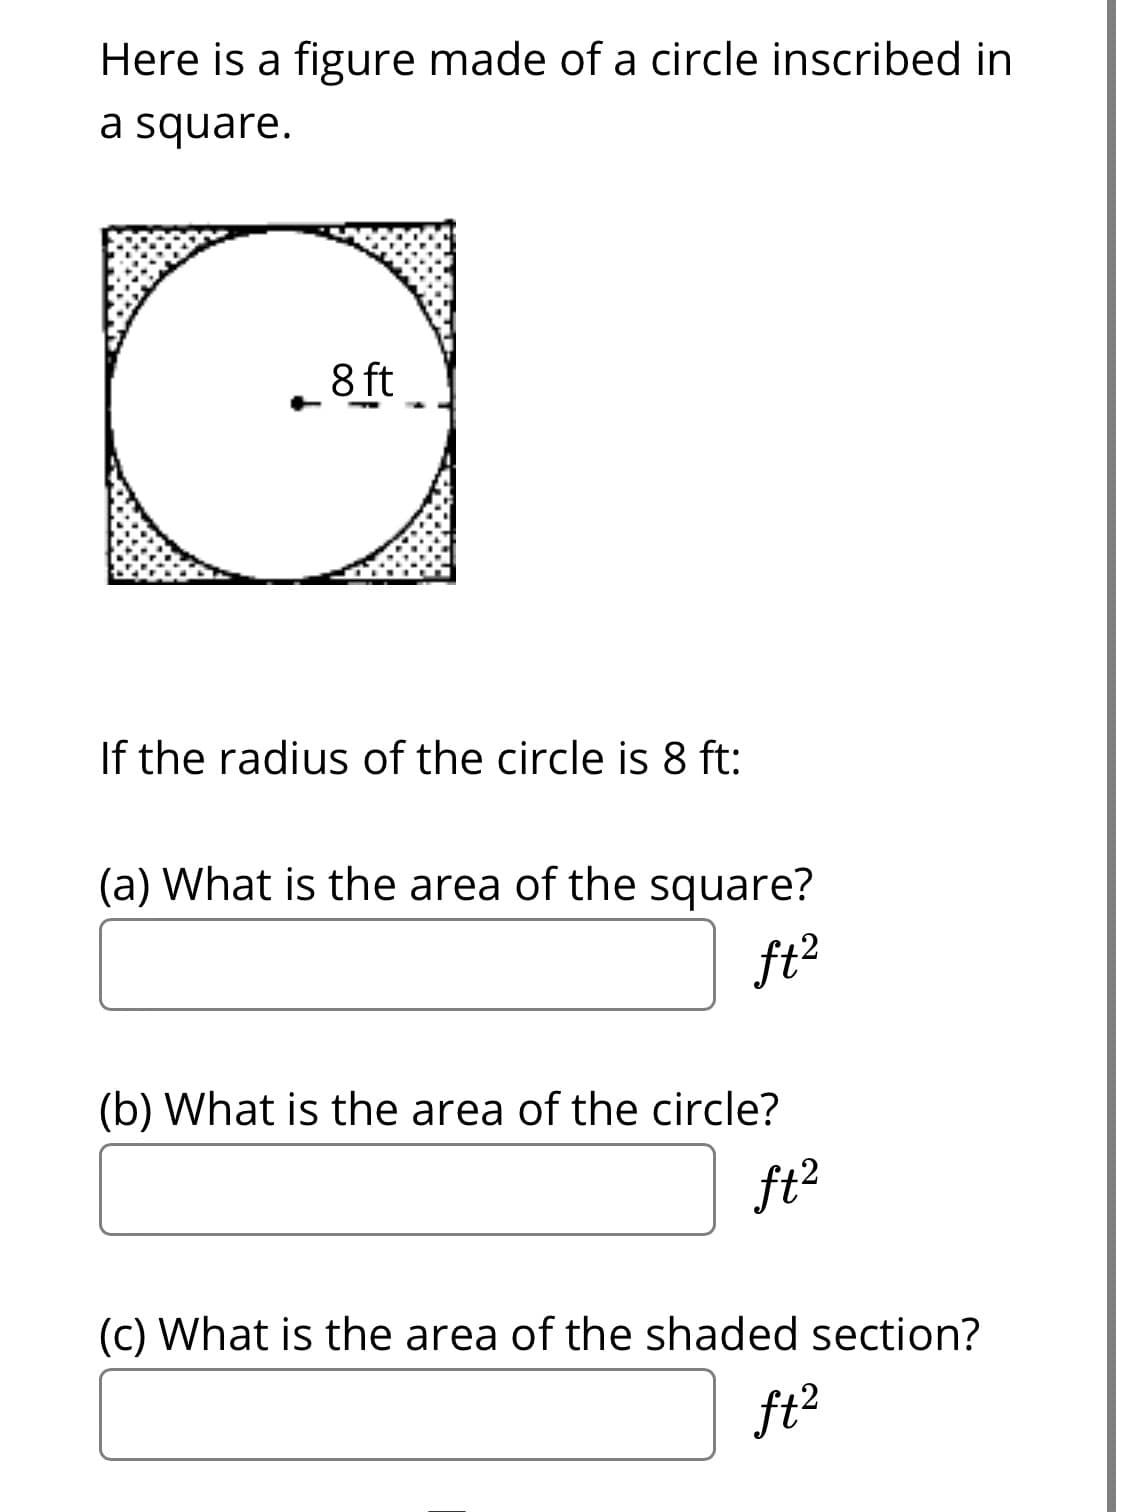 Here is a figure made of a circle inscribed in
a square.
8 ft
If the radius of the circle is 8 ft:
(a) What is the area of the square?
ft?
(b) What is the area of the circle?
ft?
(c) What is the area of the shaded section?
ft?
